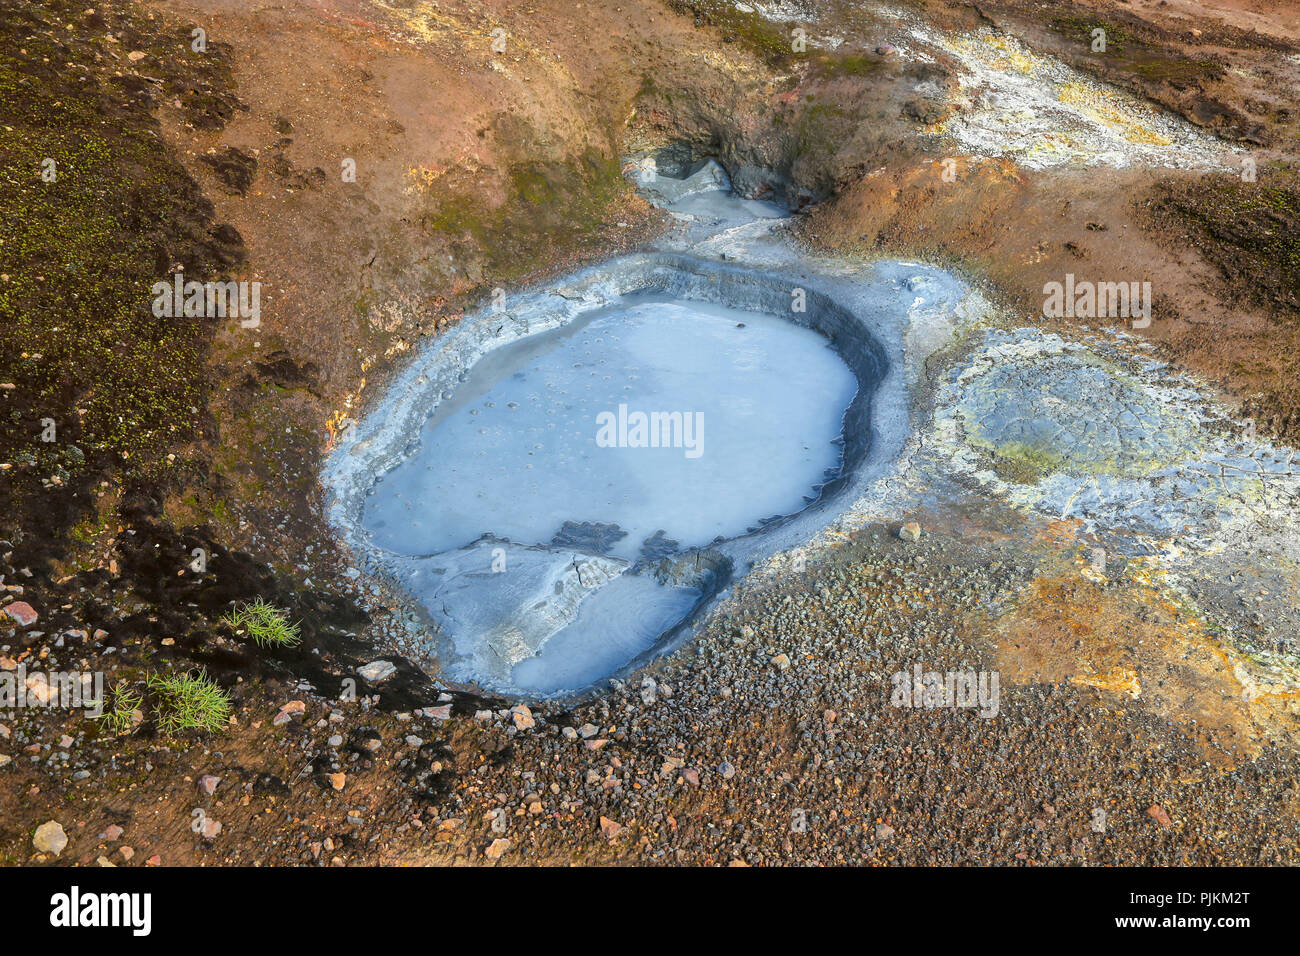 Iceland, high temperature zone, blue mud pot in brown soil, hot spring, Stock Photo